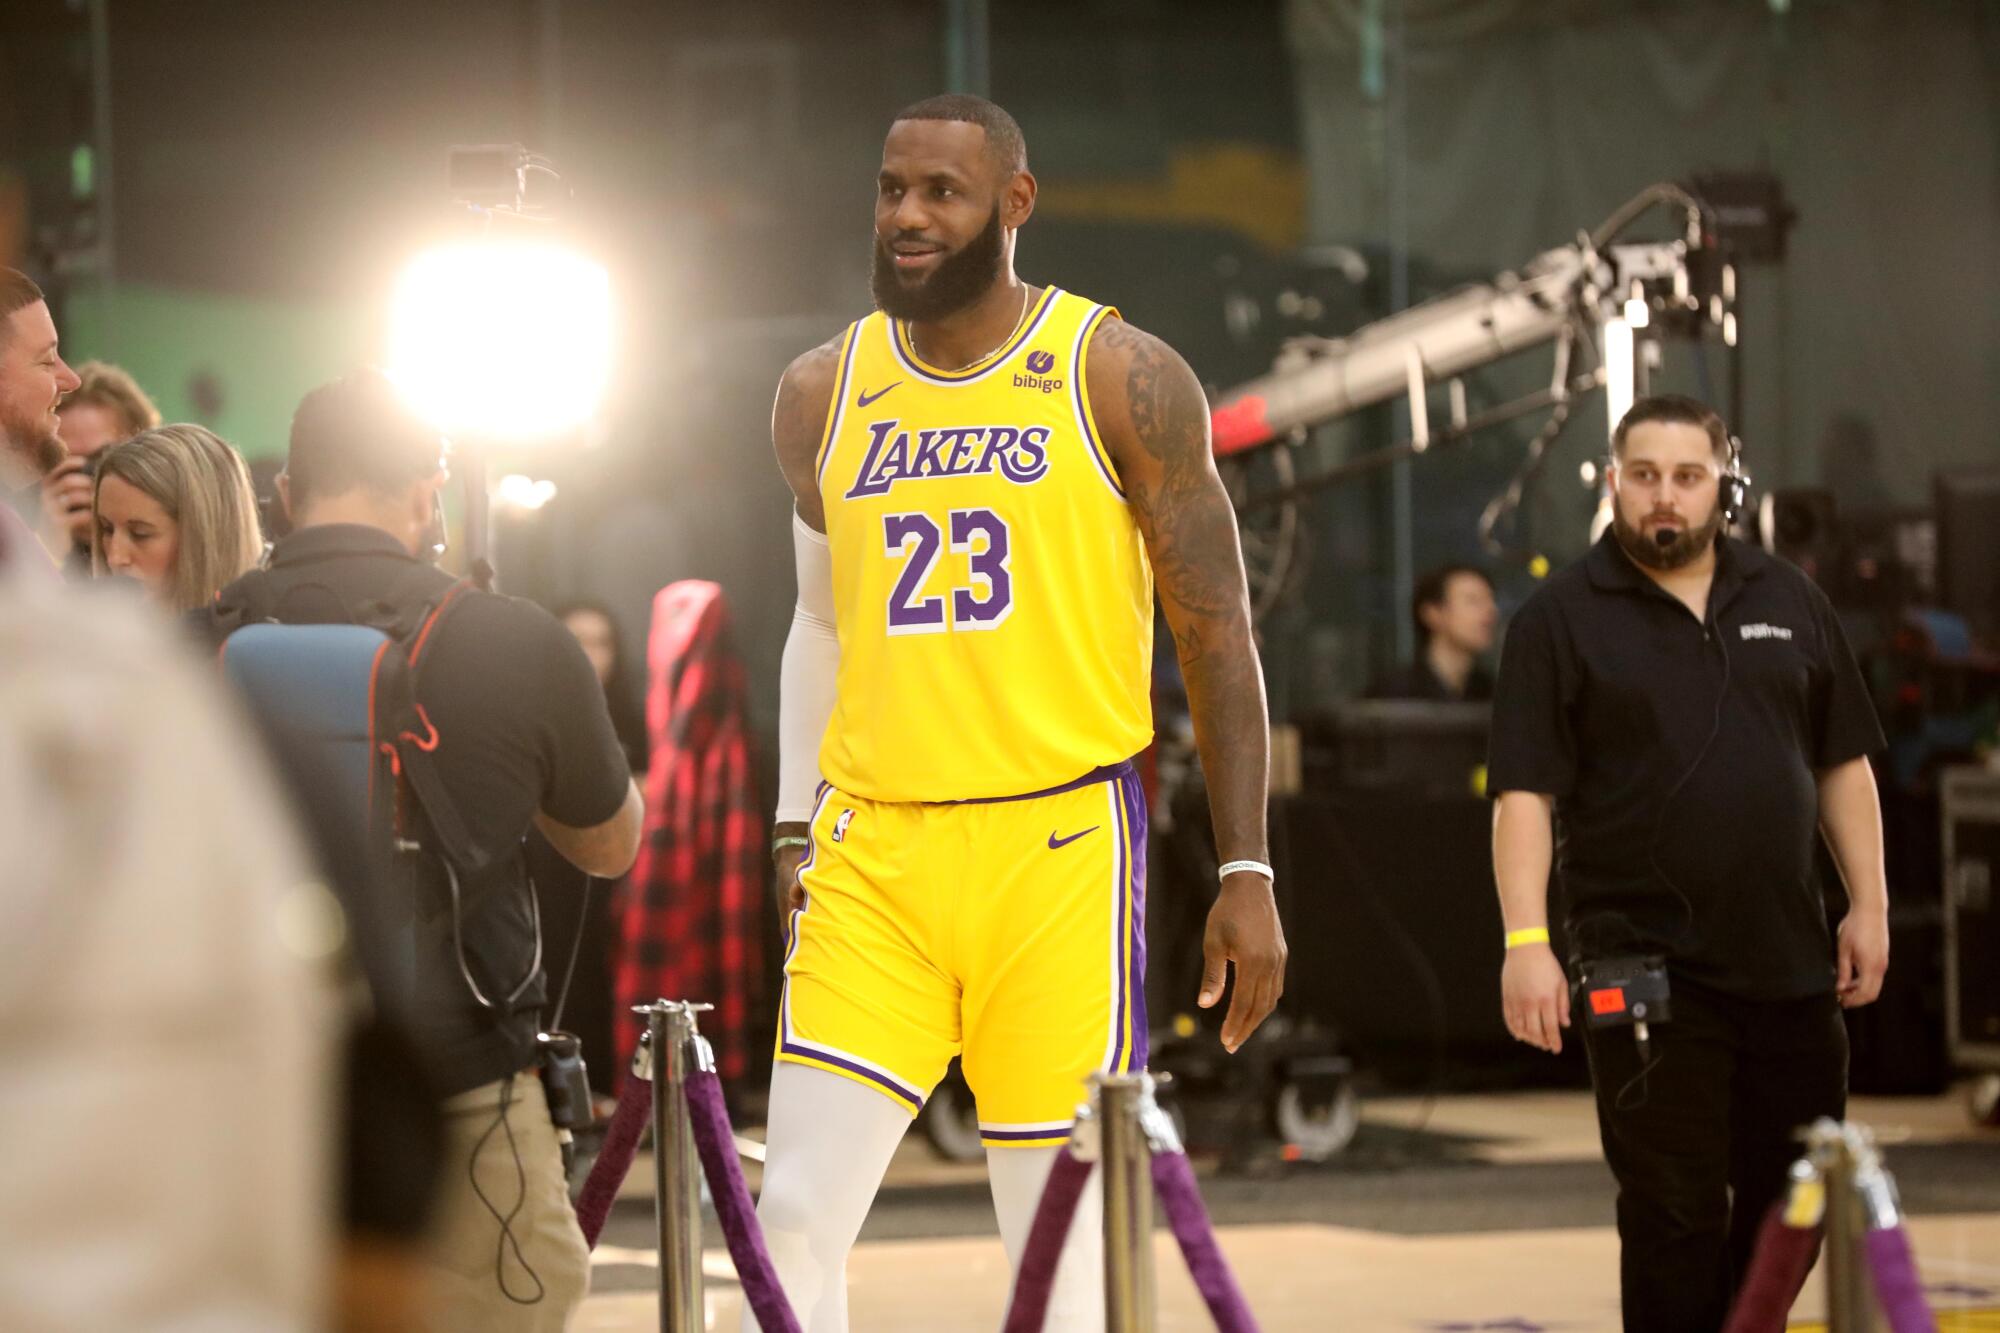 LeBron James: Lakers star pictured in famous jersey for first time